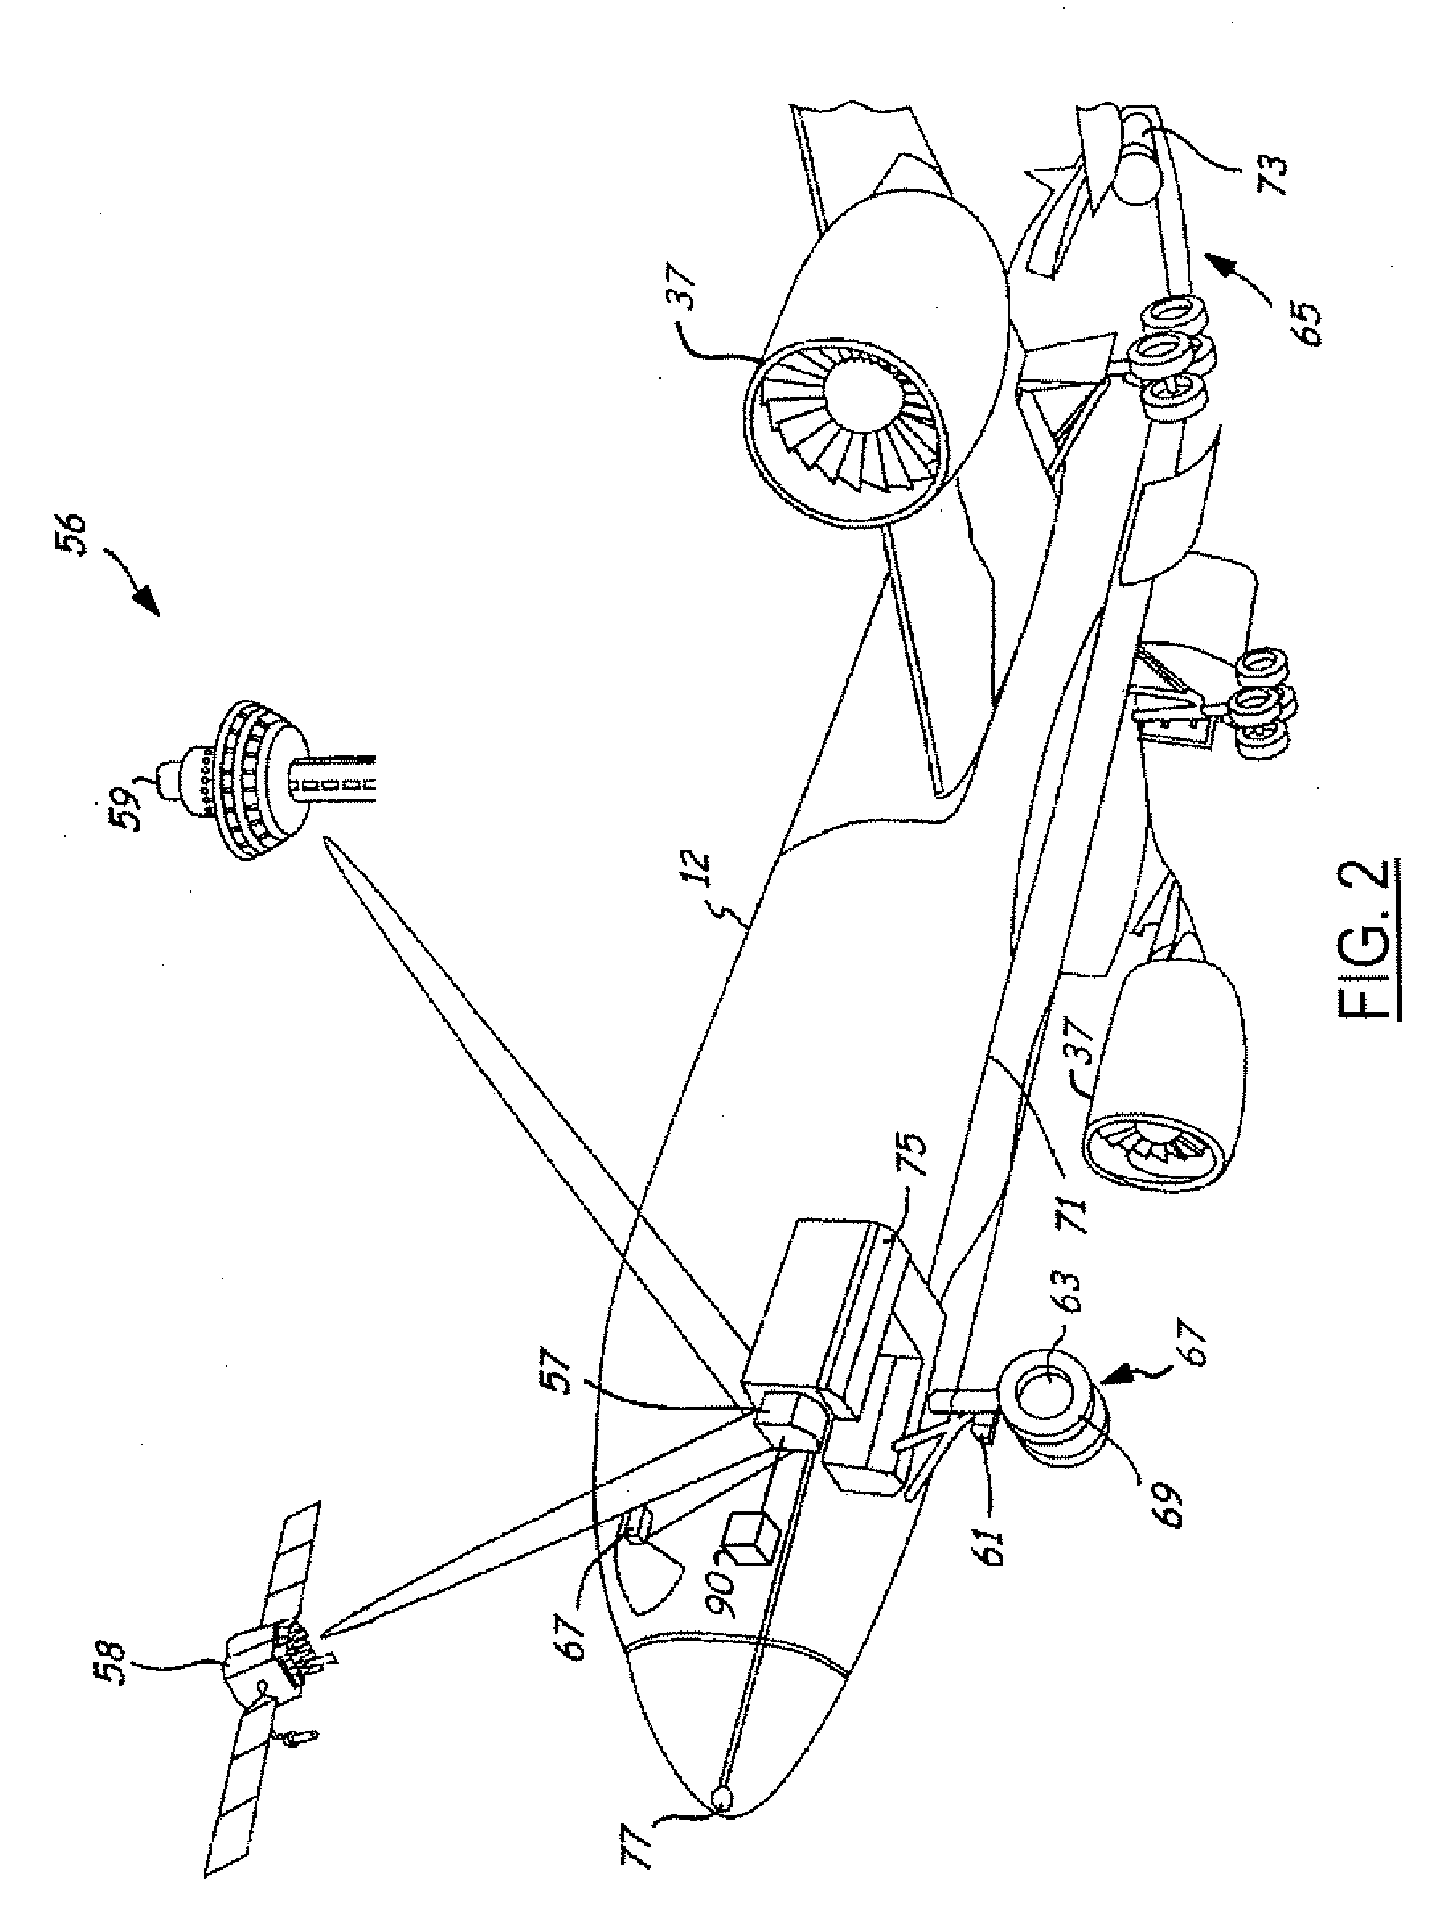 Powered nose aircraft wheel system